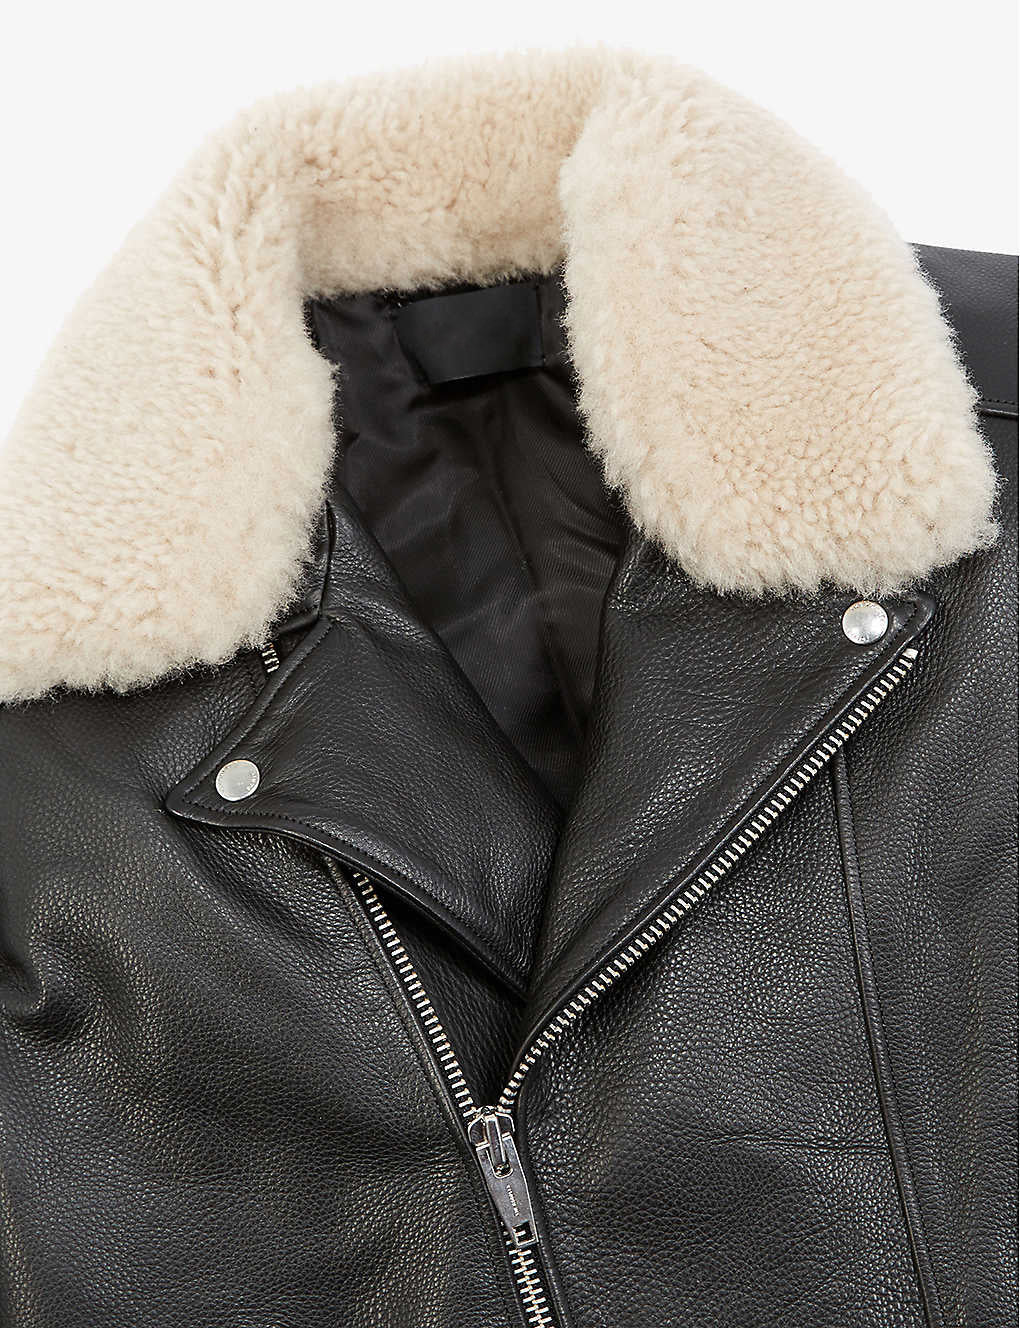 Men’s Black Leather Shearling Collared Jacket